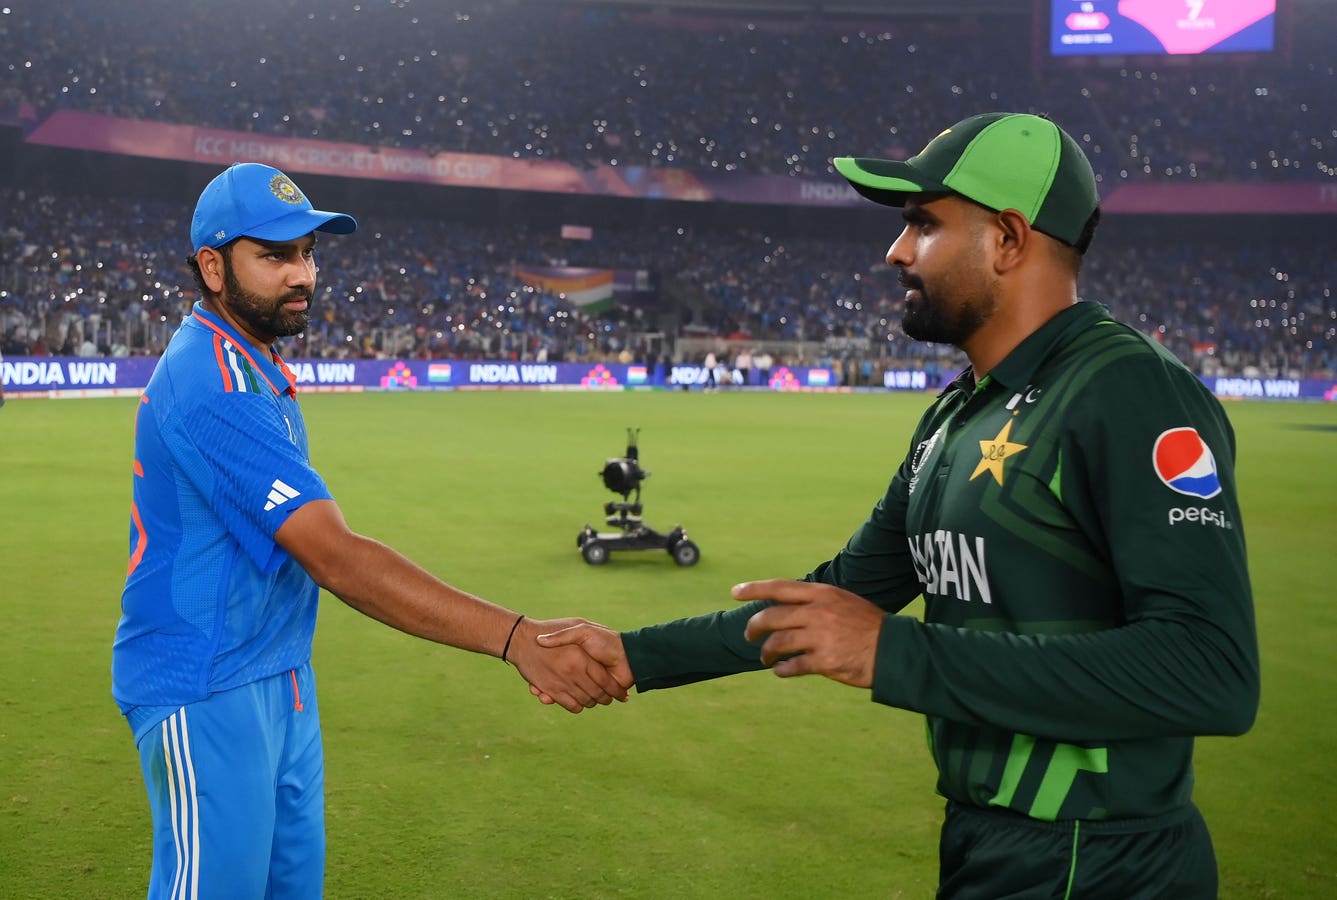 Every Effort Needs To Be Made To Revive Epic India-Pakistan Cricket Rivalry